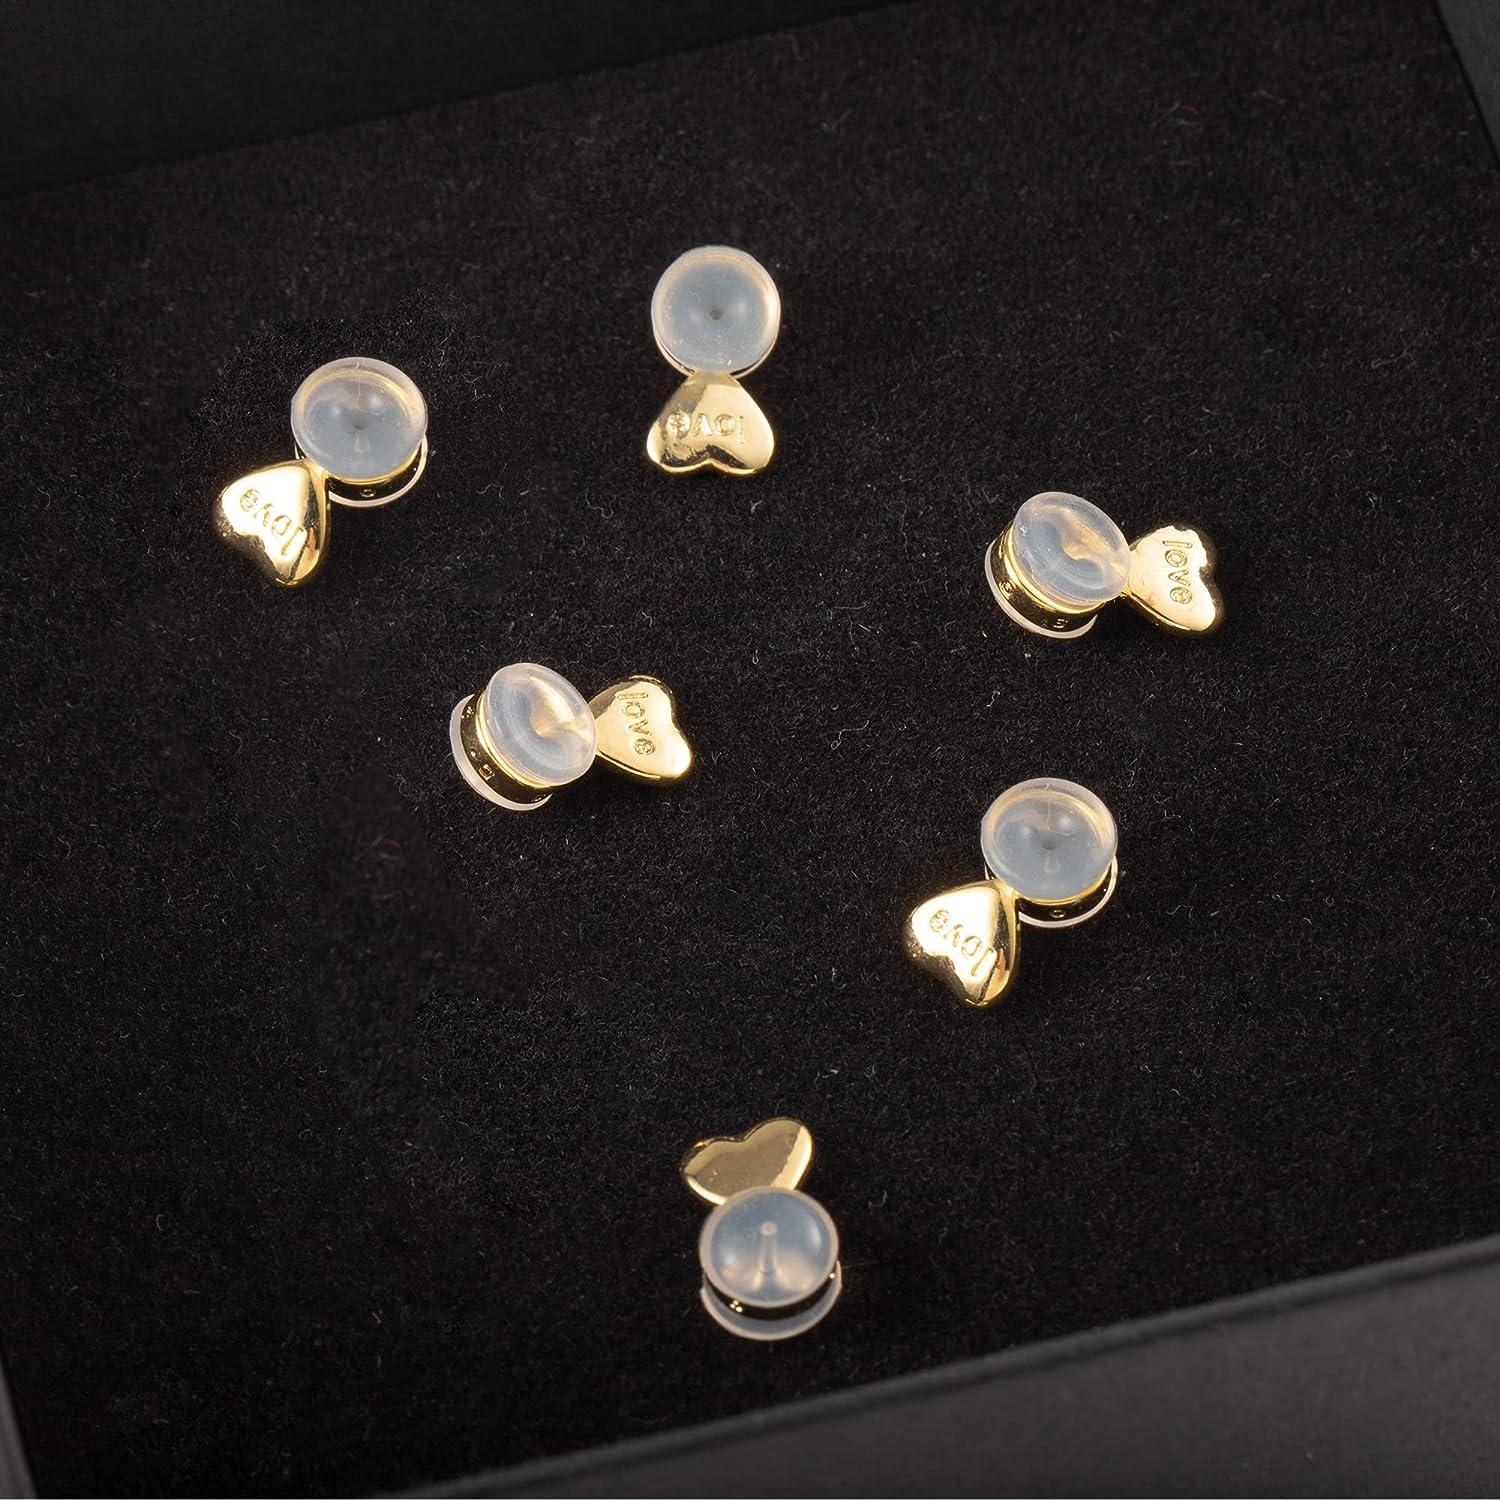  10 Pcs/5 Pairs Earring Backs for Studs, Droopy Ears